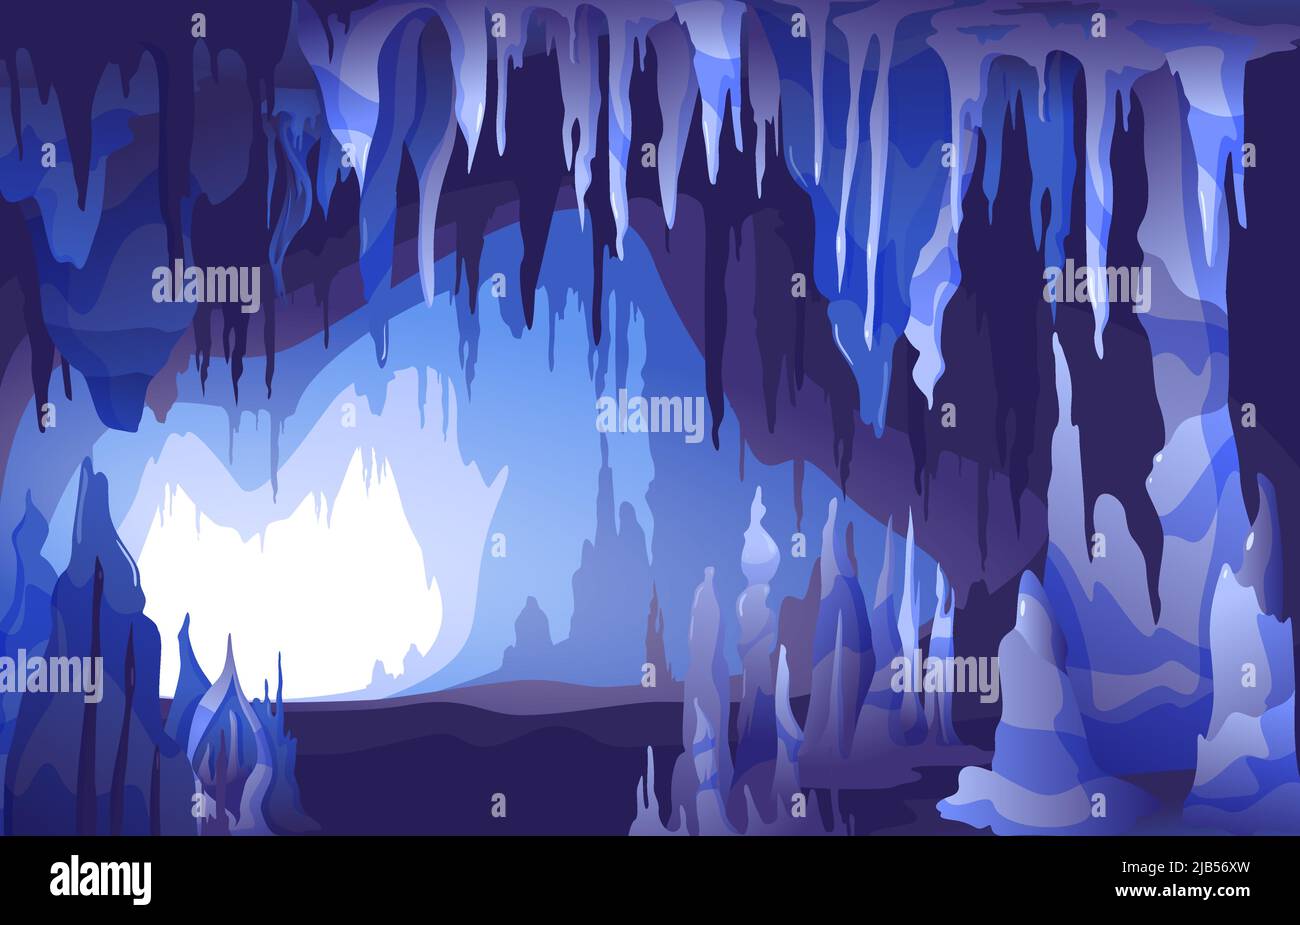 Interior view of cave entrance with spectacular stalactites and stalagmites formations in blue grey hues vector illustration Stock Vector